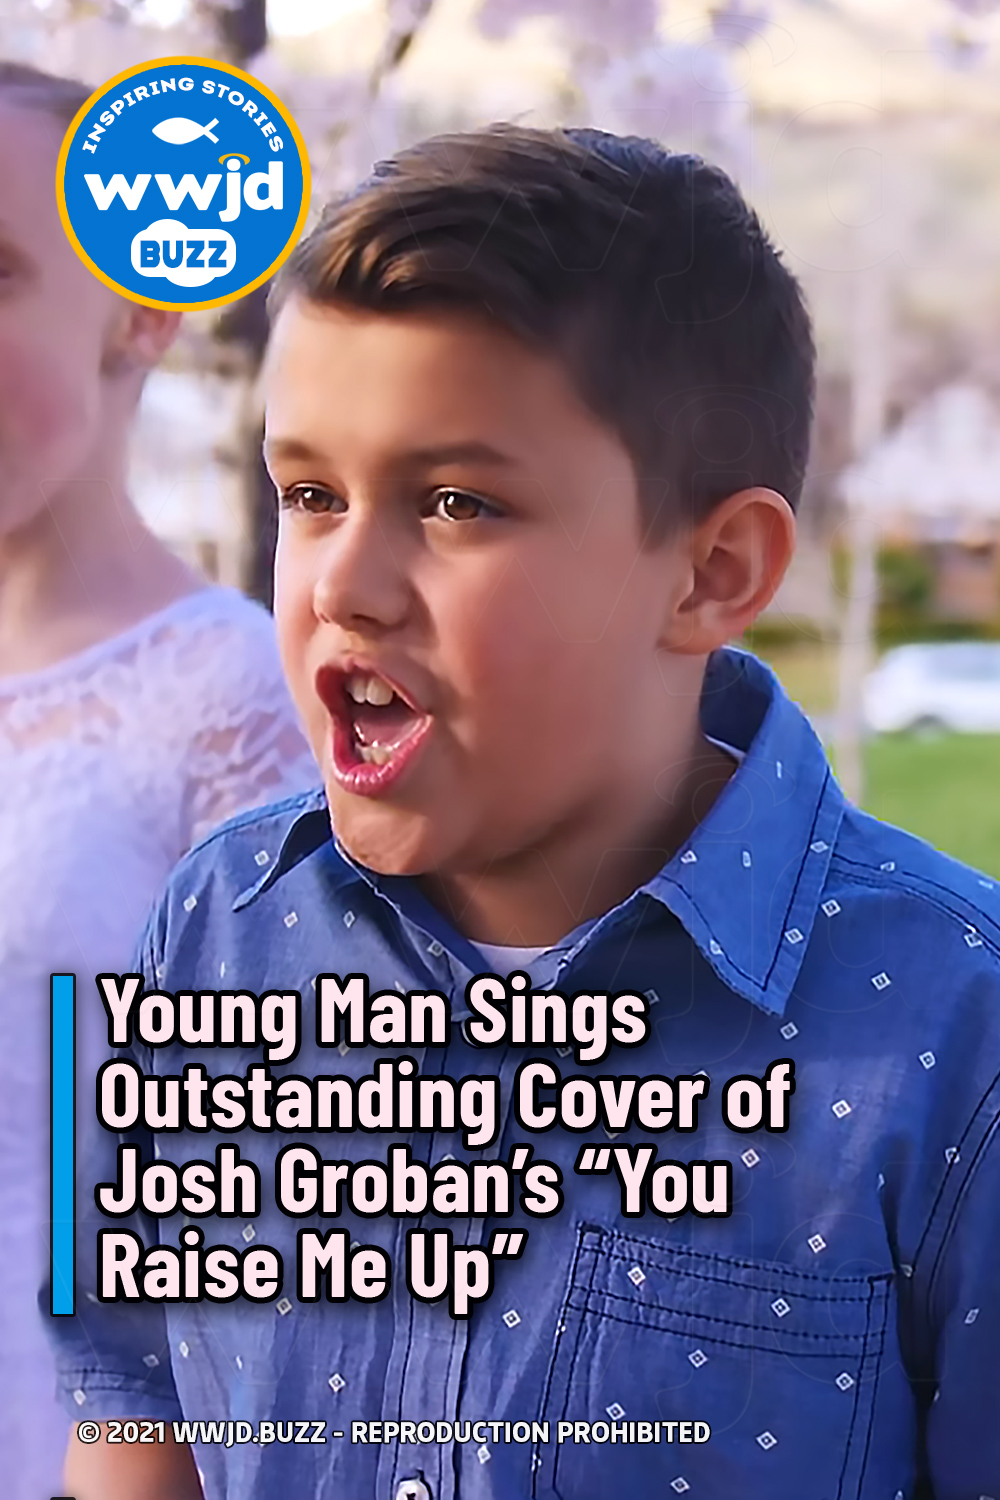 Young Man Sings Outstanding Cover of Josh Groban’s “You Raise Me Up”